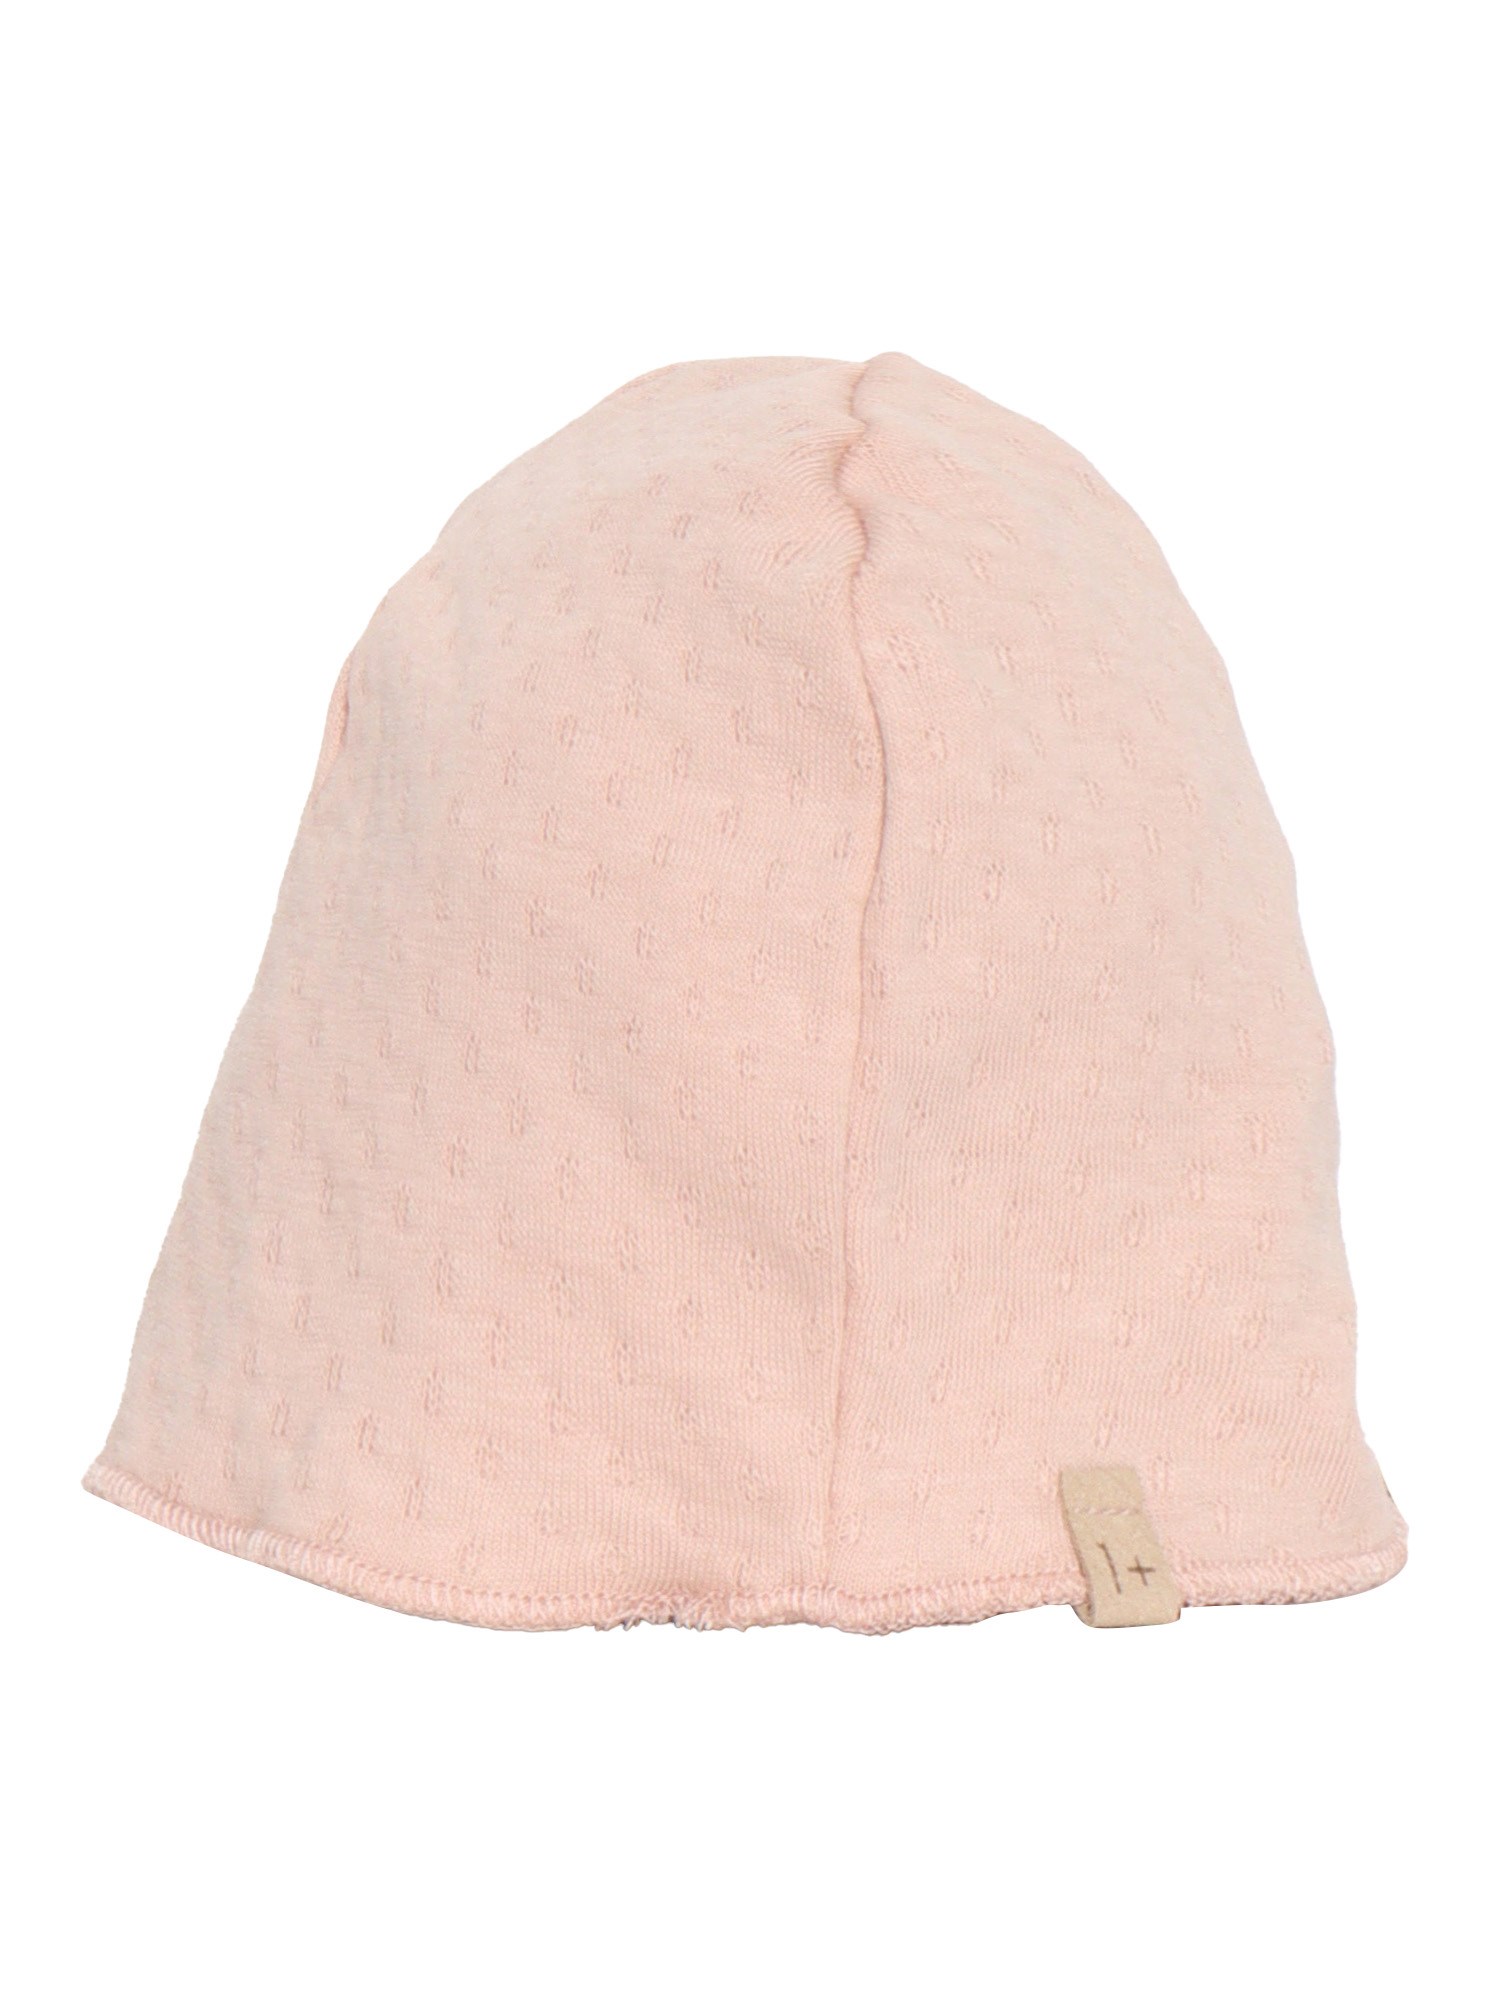 One More In The Family Pink Newborn Hat